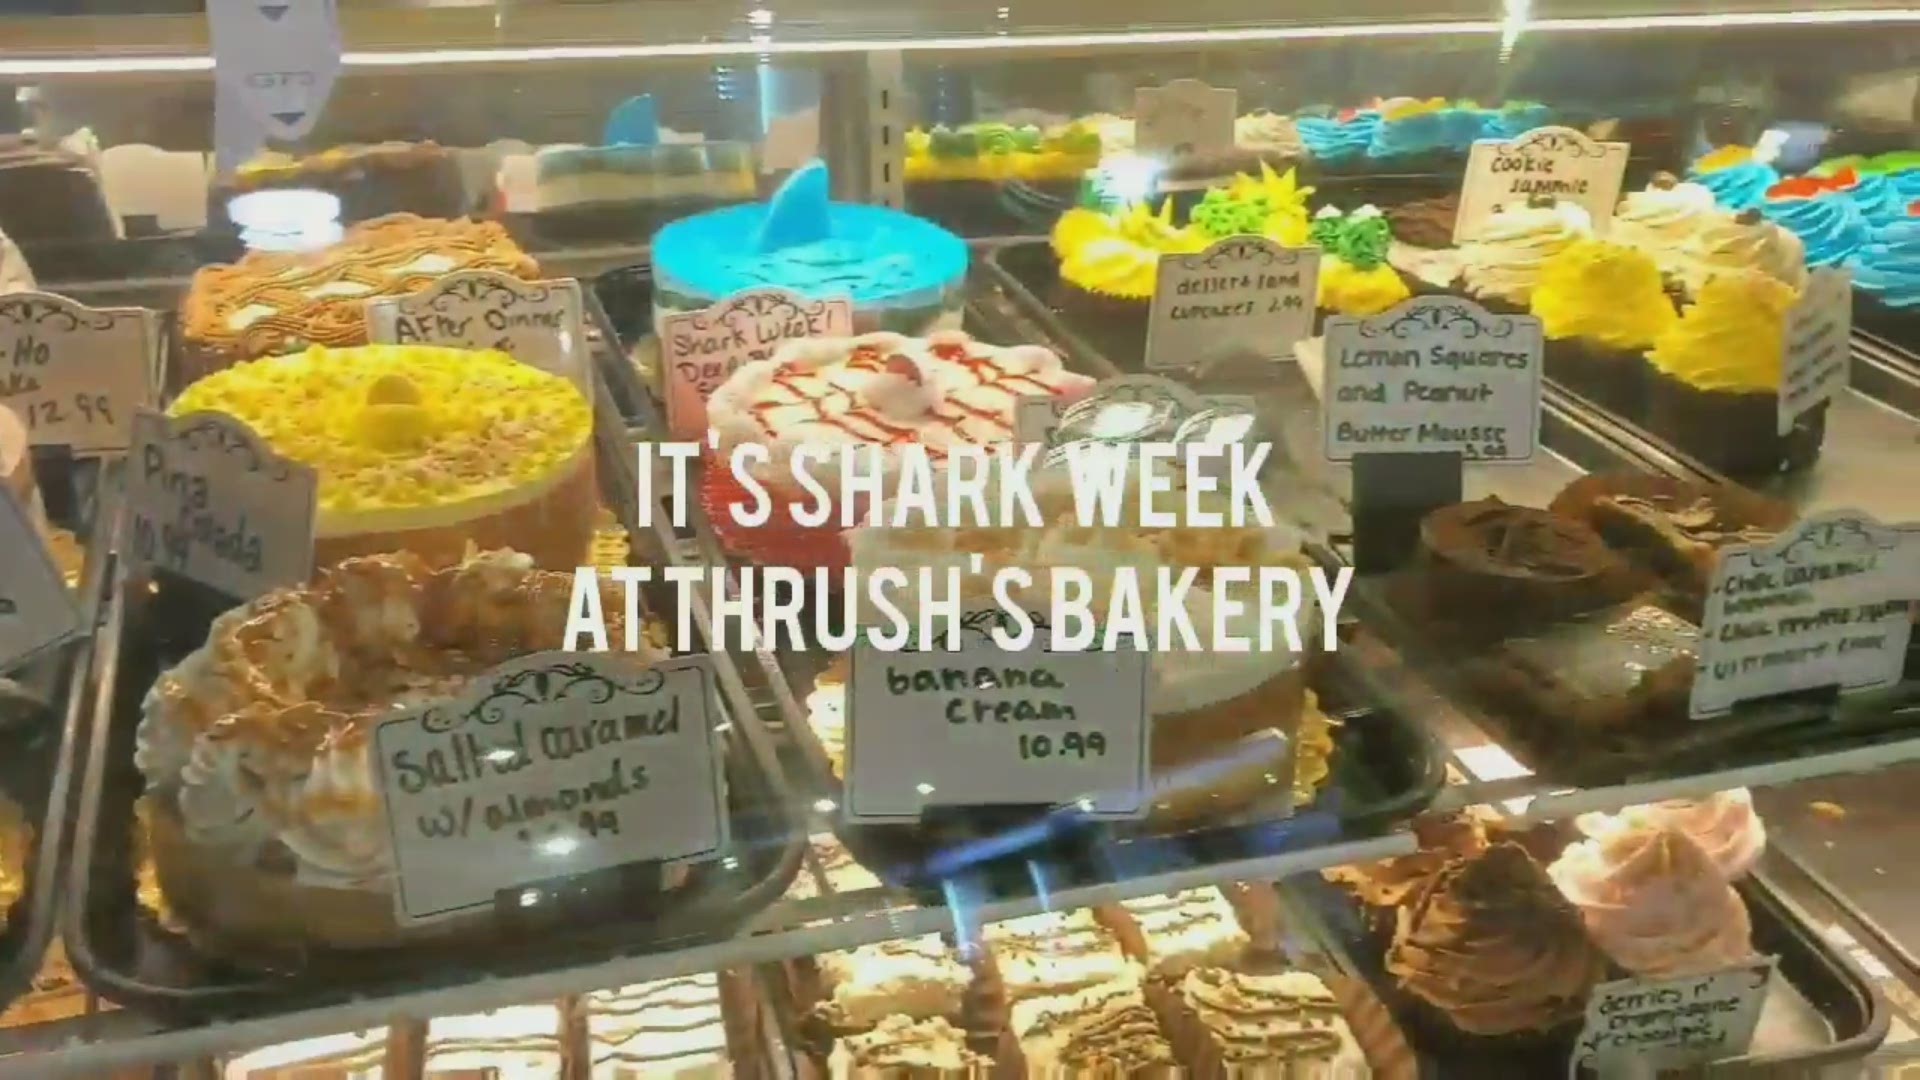 Thrush's Bakery is serving up shark-themed treats through Saturday in honor of National Geographic's annual 'Shark Week.'